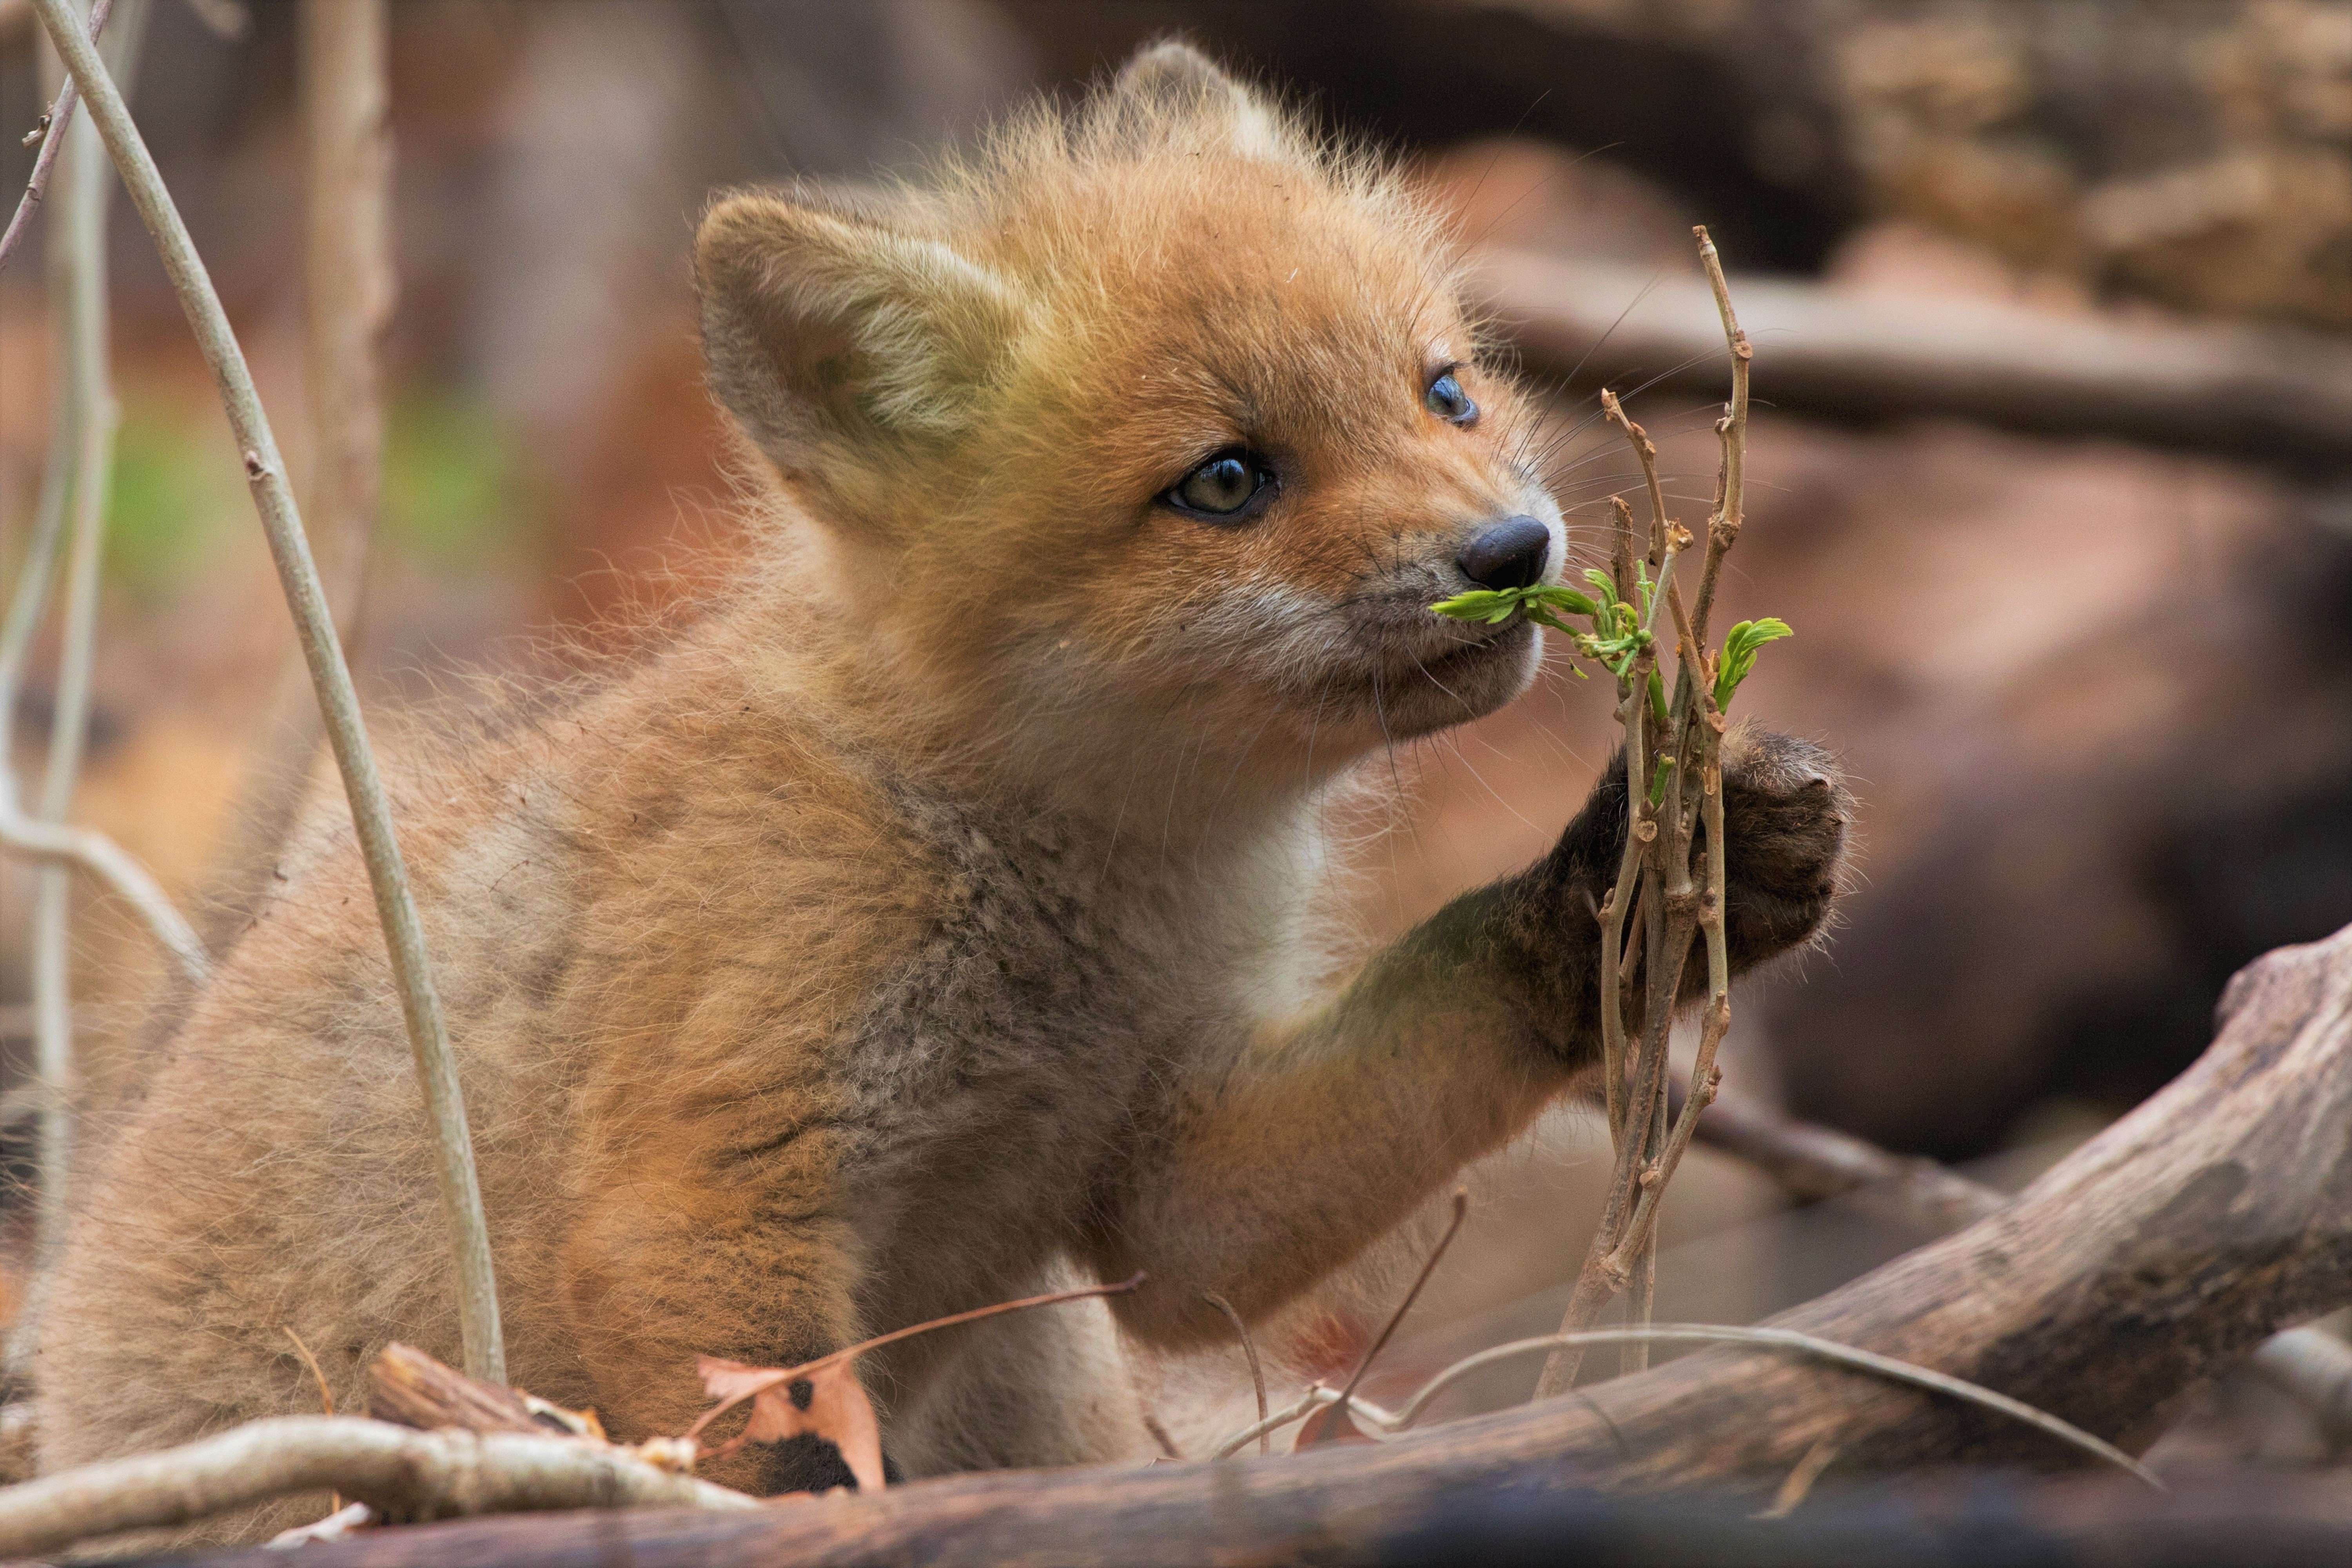 baby fox sounds